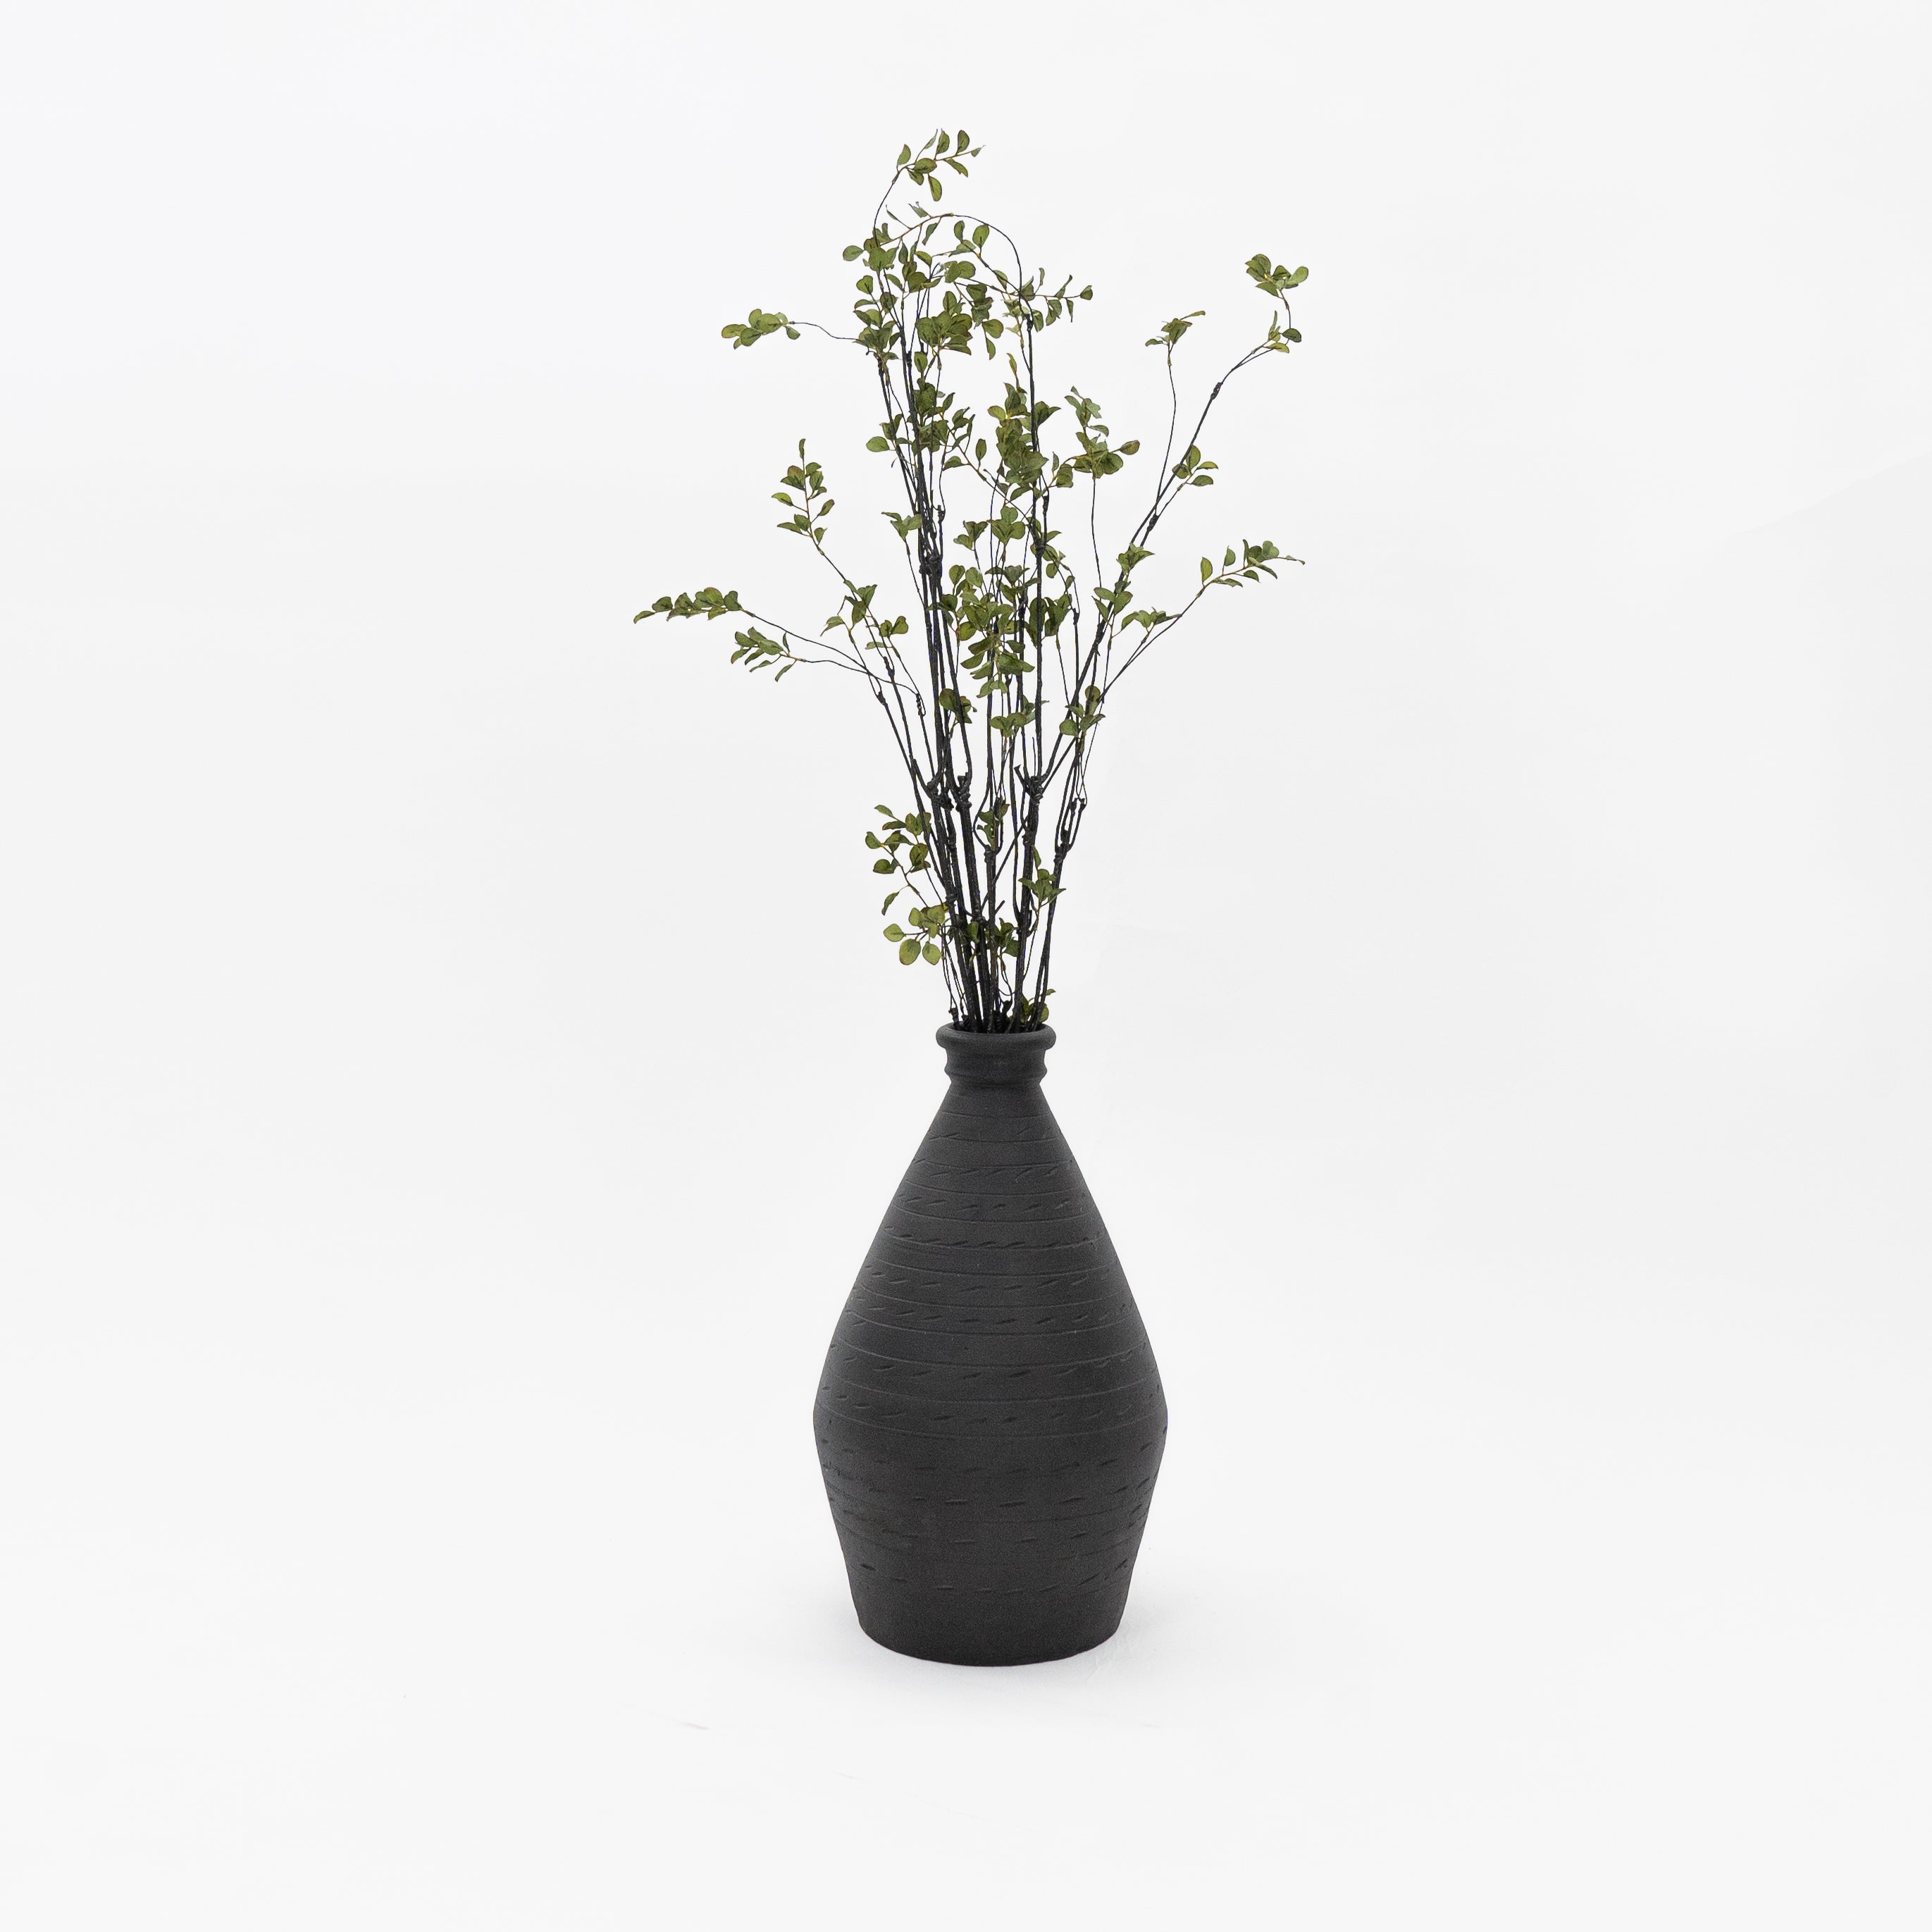 Matthiola Artificial Flower - Wood and Steel Furnitures